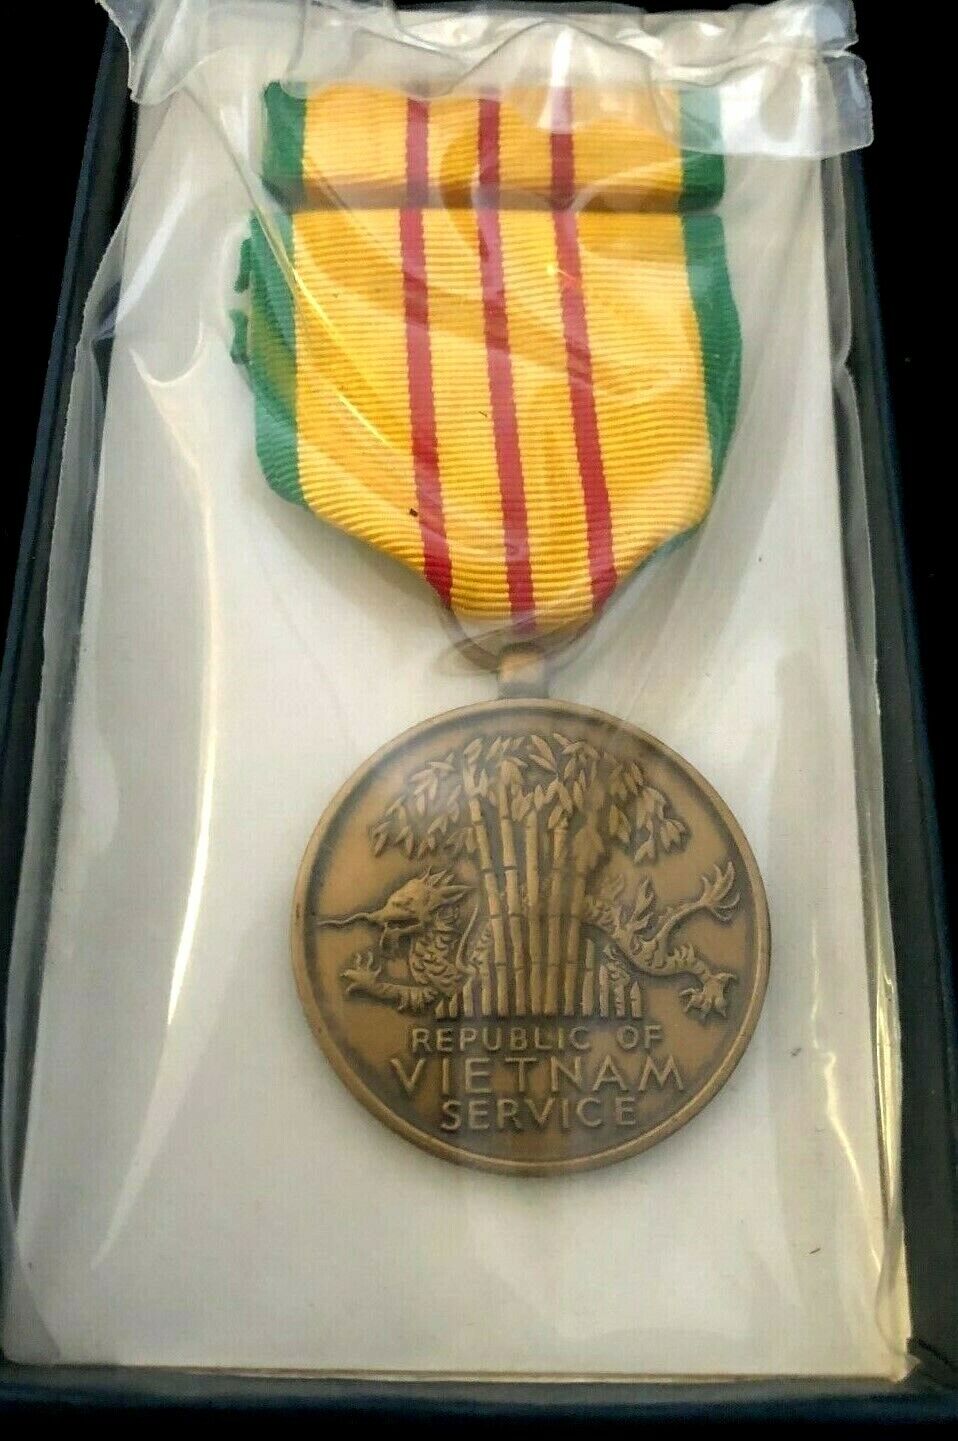 NEW-ORIGINAL-VIETNAM SERVICE MEDAL SET-, IN MILITARY-GI- ISSUE BOX- Dated 1969